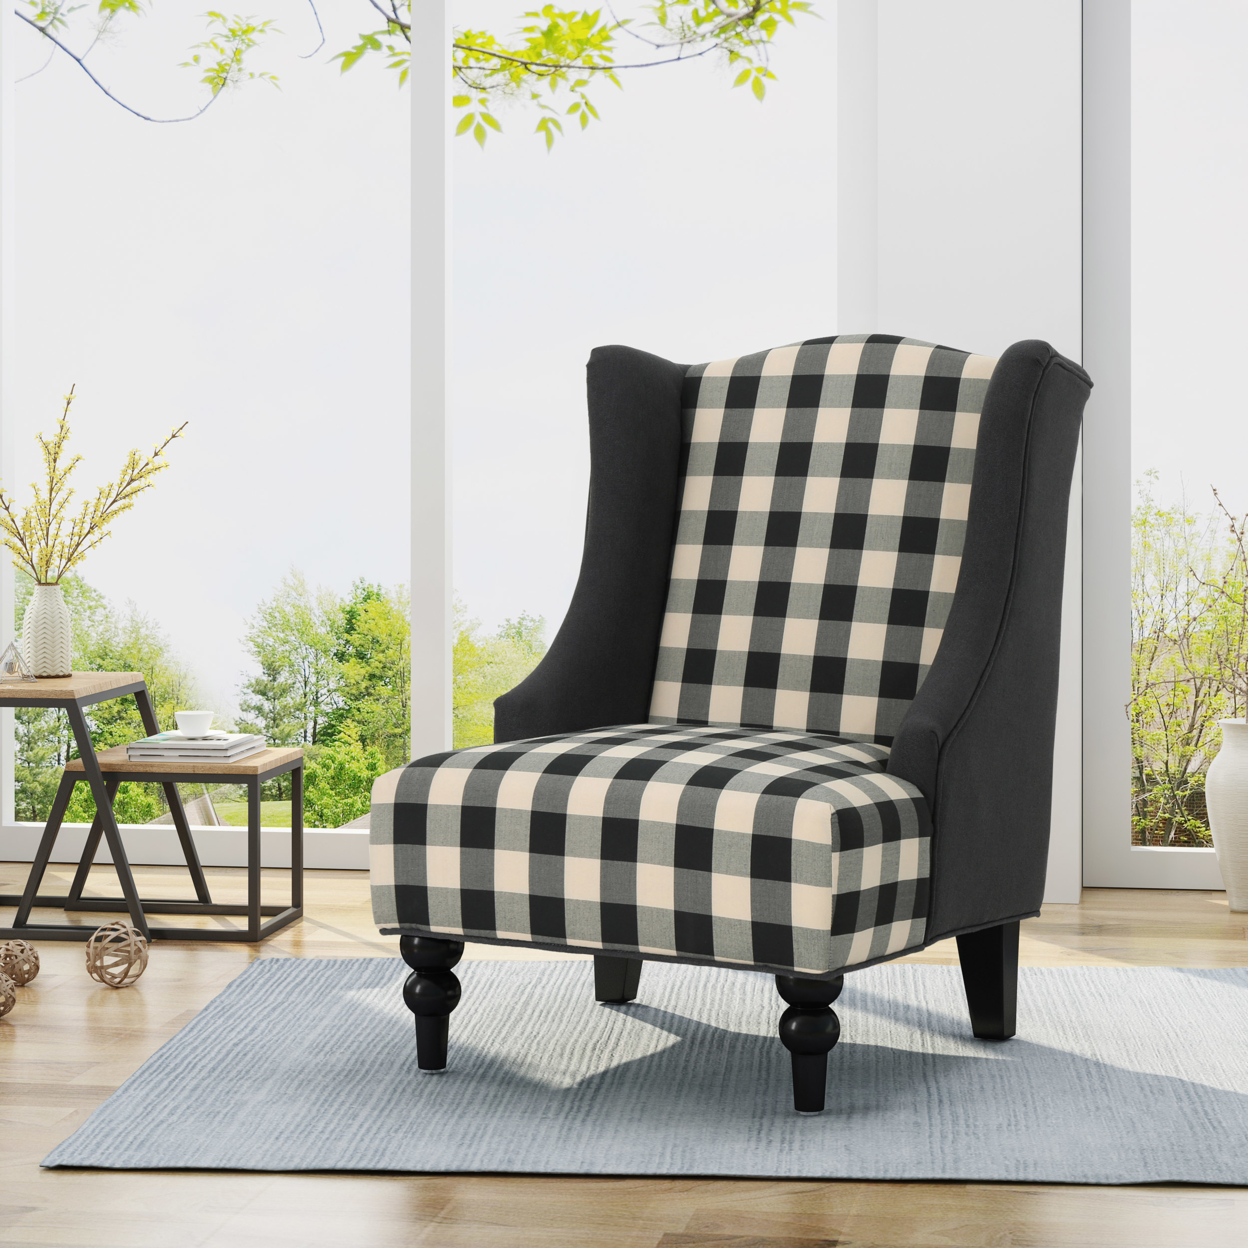 Alonso High-Back Fabric Club Chair, Black Checkerboard And Dark Charcoal - Black Checkerboard